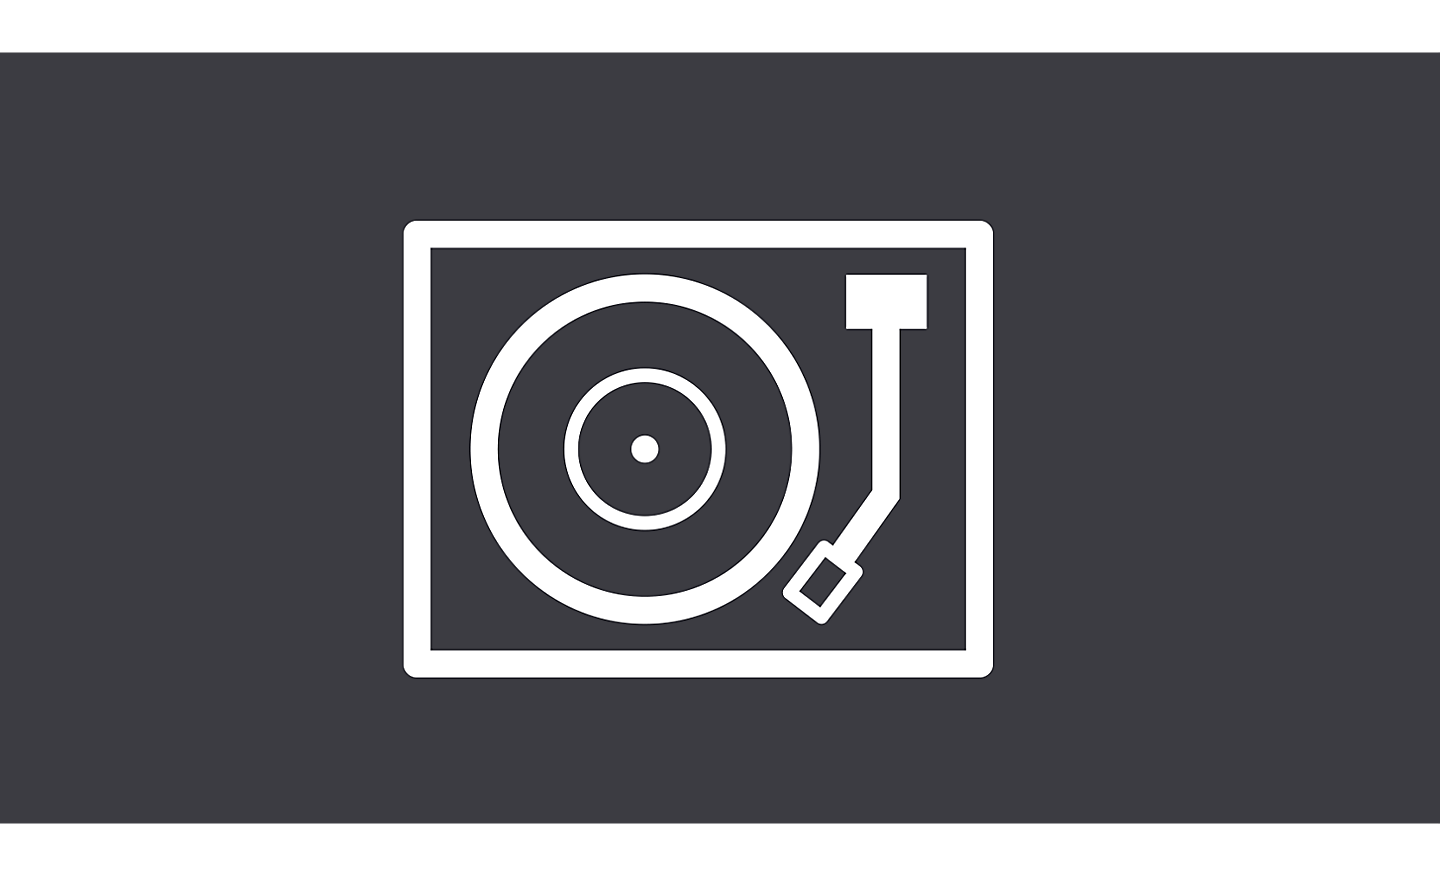 An image of the vinyl processor icon.